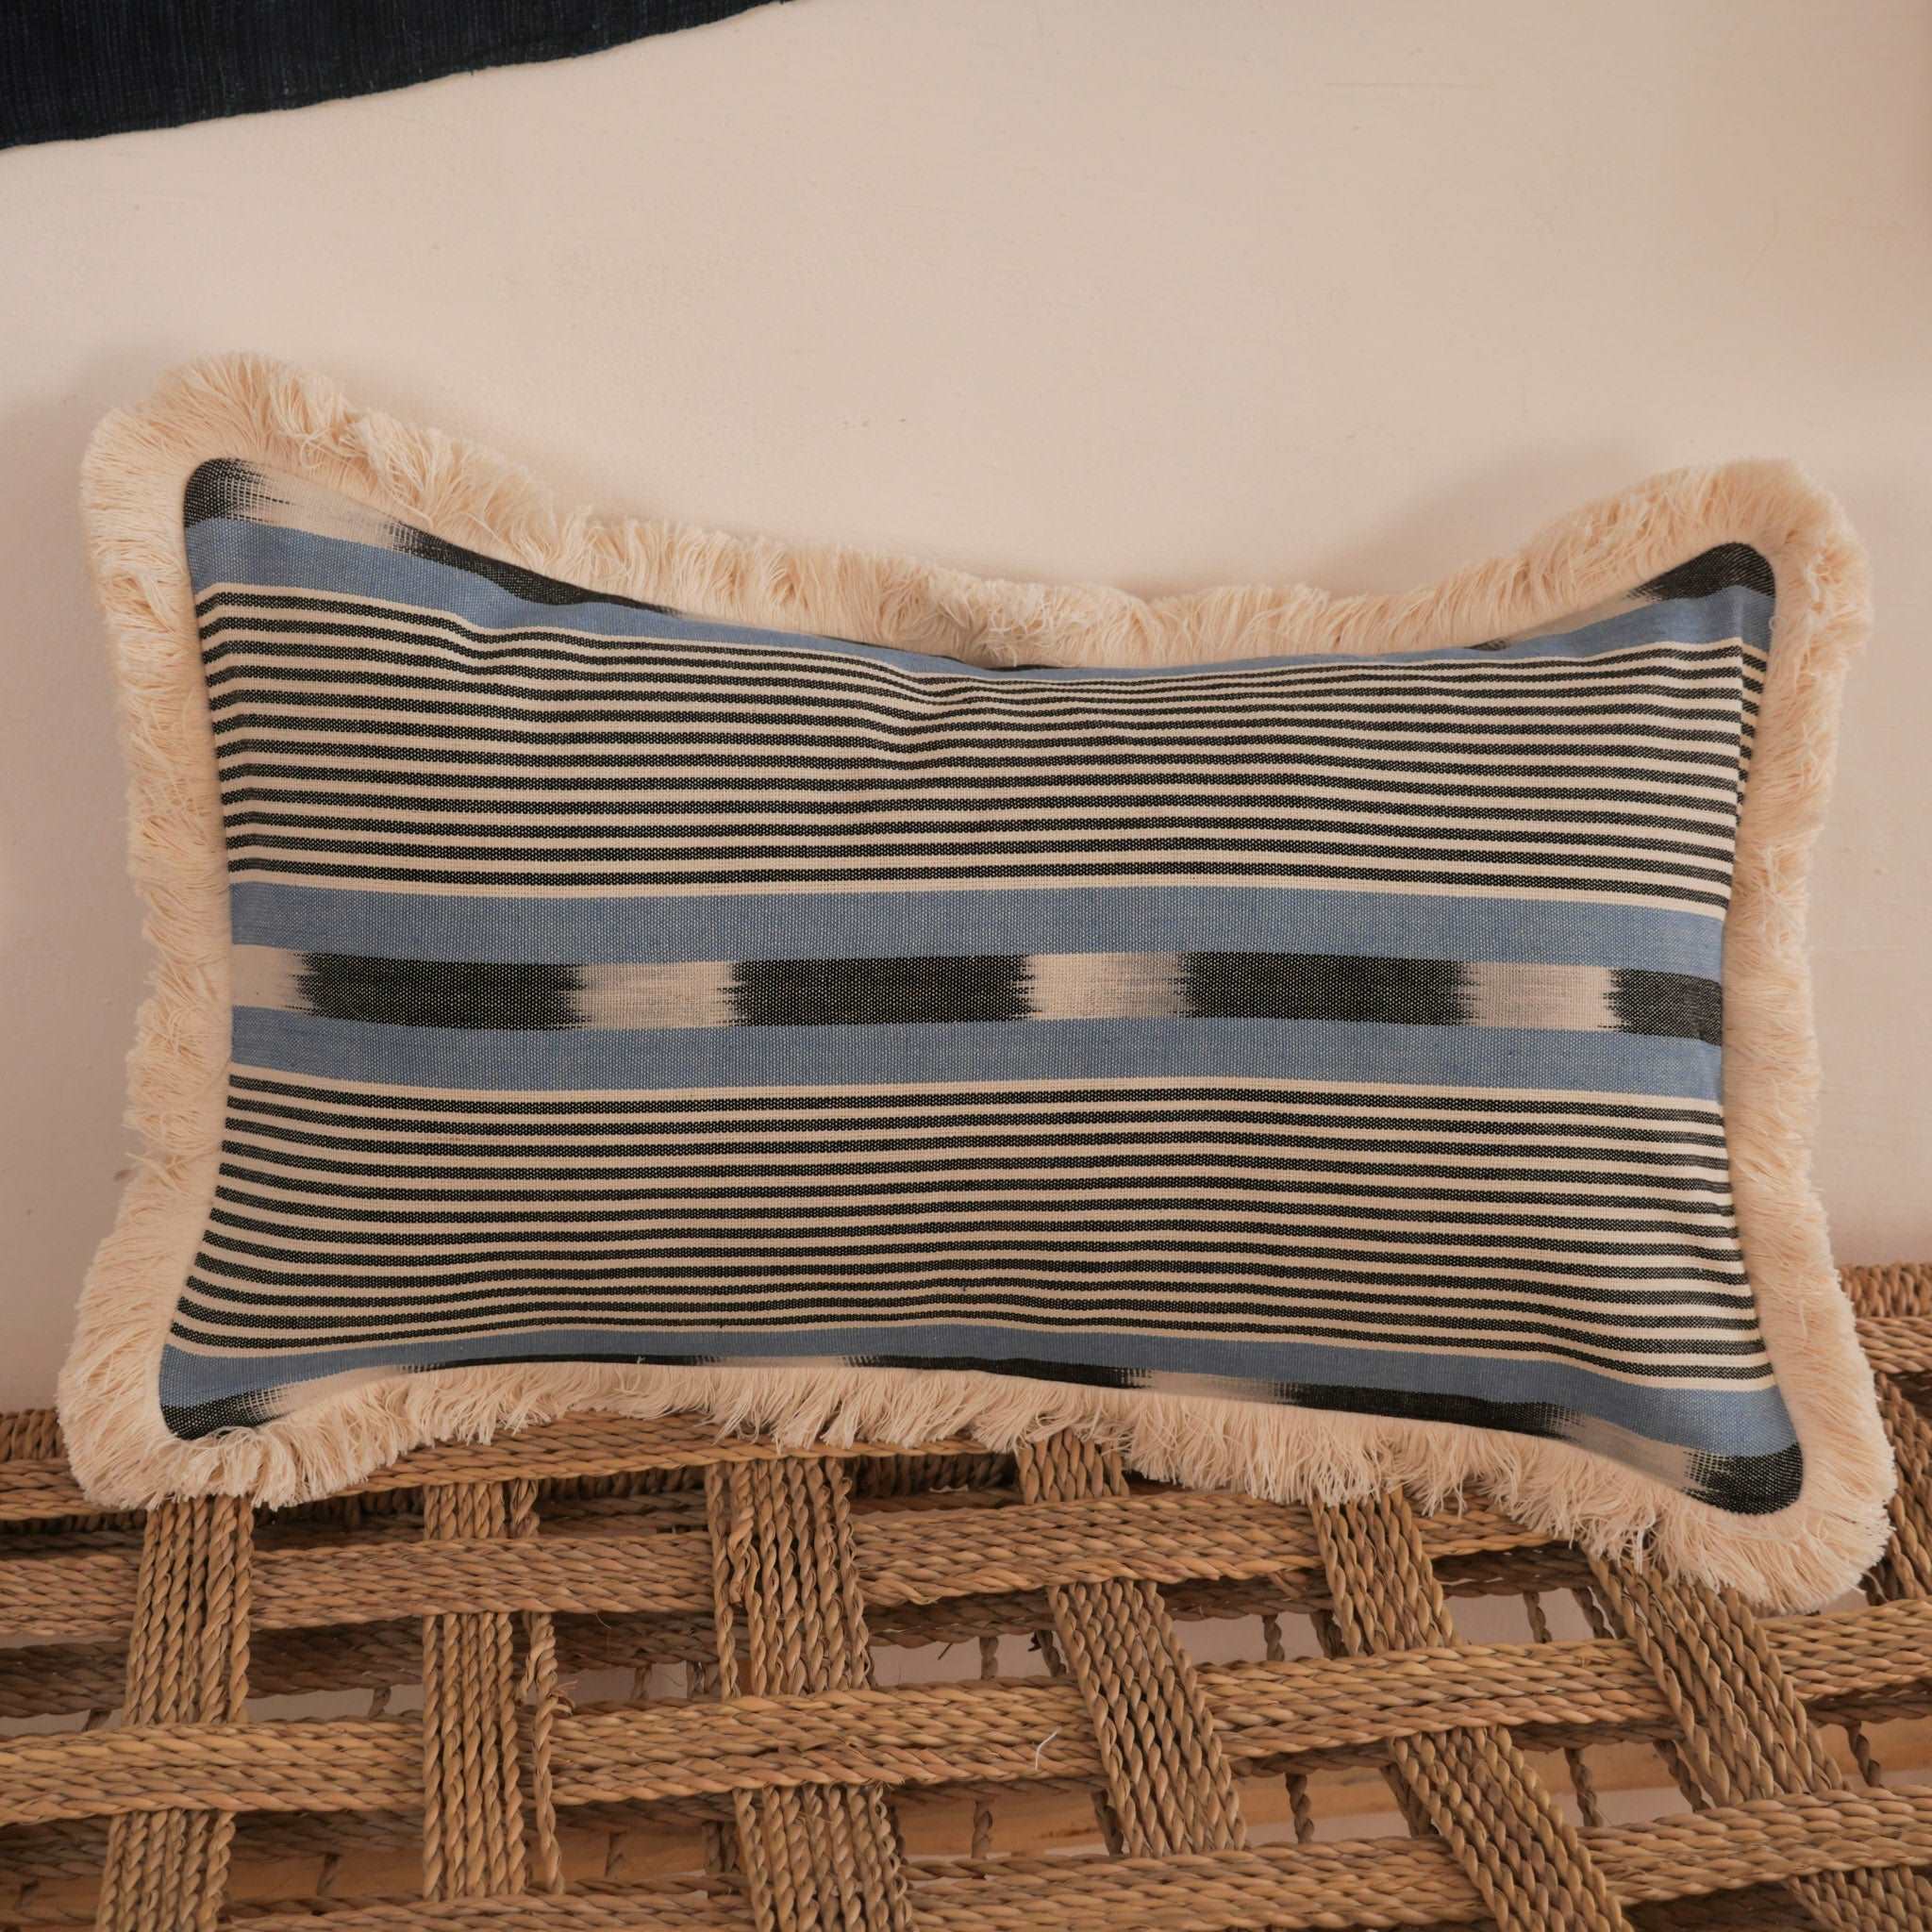 Luxurious cushions handmade in Paris for Storie from a beautiful, thick, hand-woven cotton in Burkina Faso. 